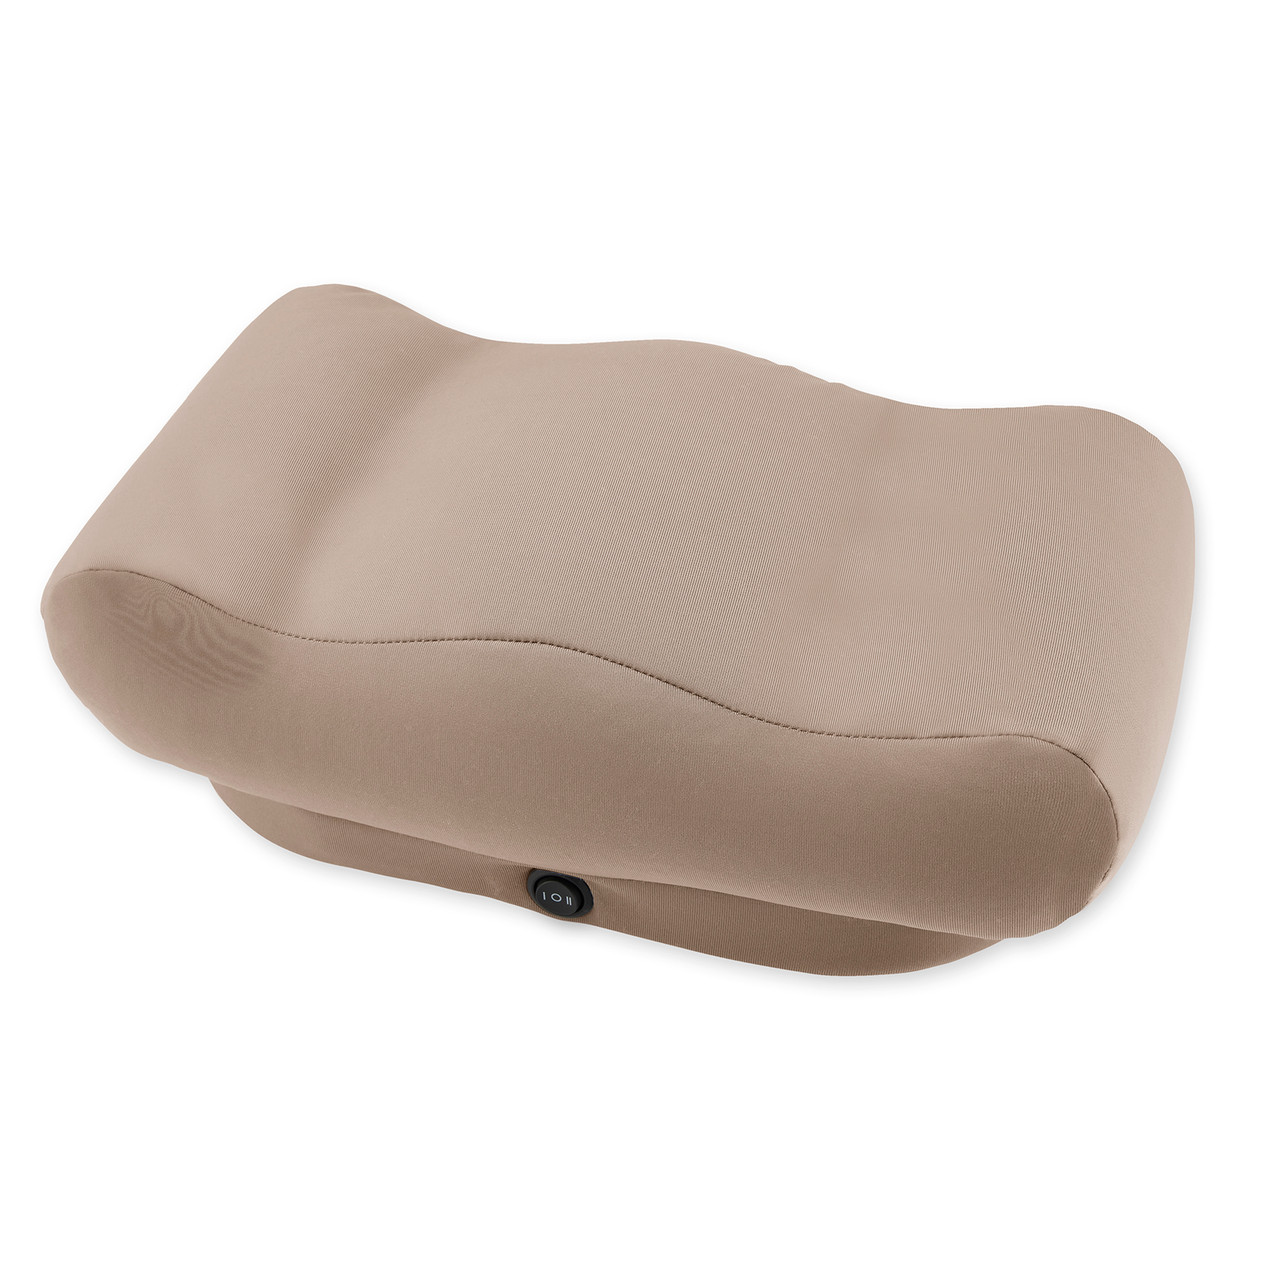 Homedics Comfort Deluxe Portable Seat Cushion Massager with Heat,  Integrated Control, Invigorating Vibration for Back 